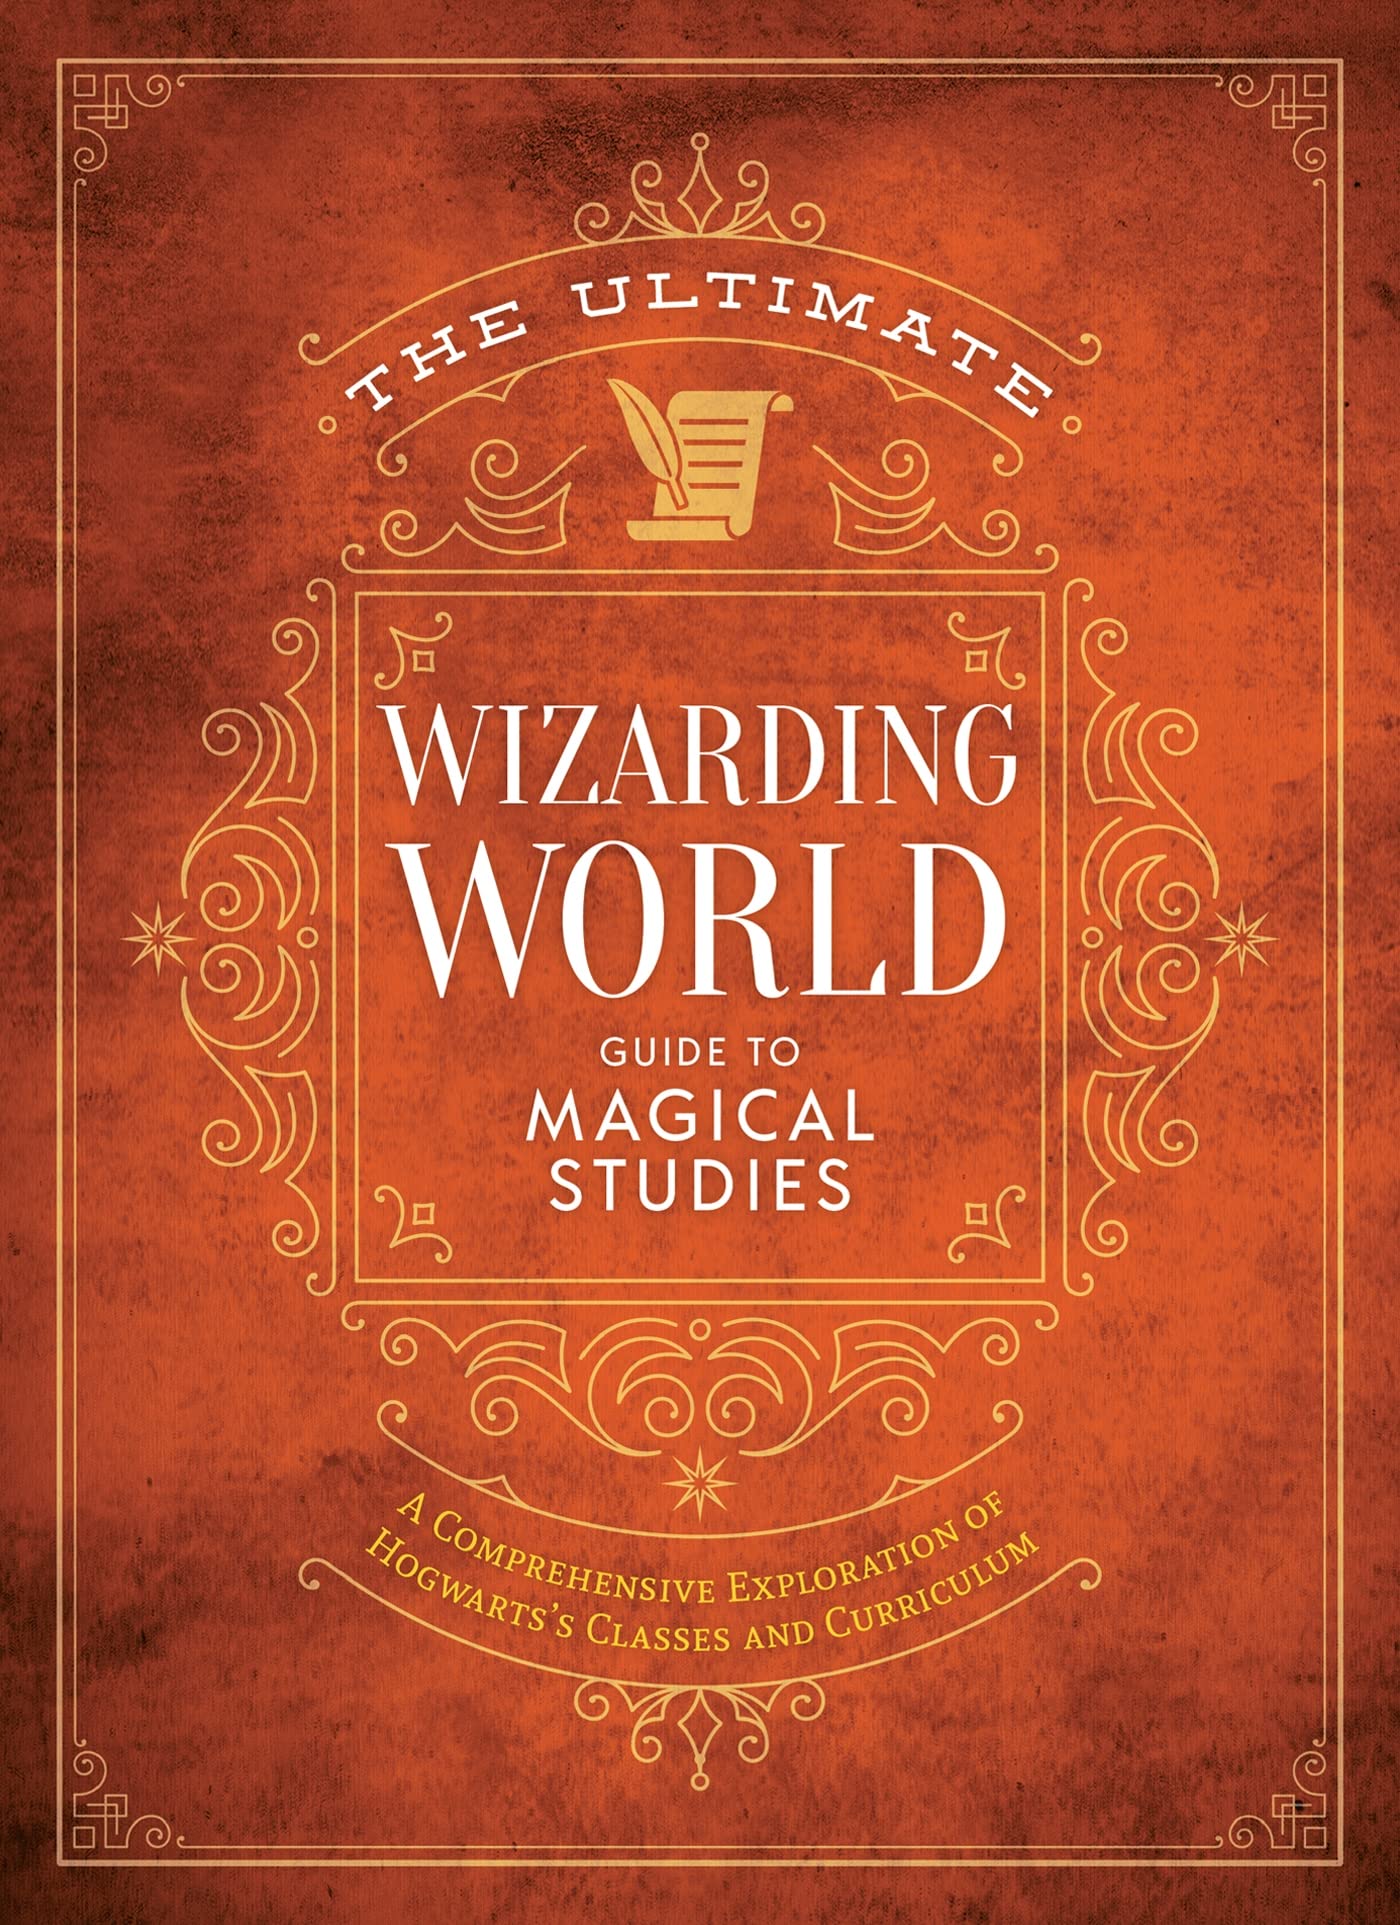 “The Ultimate Wizarding World Guide to Magical Studies”